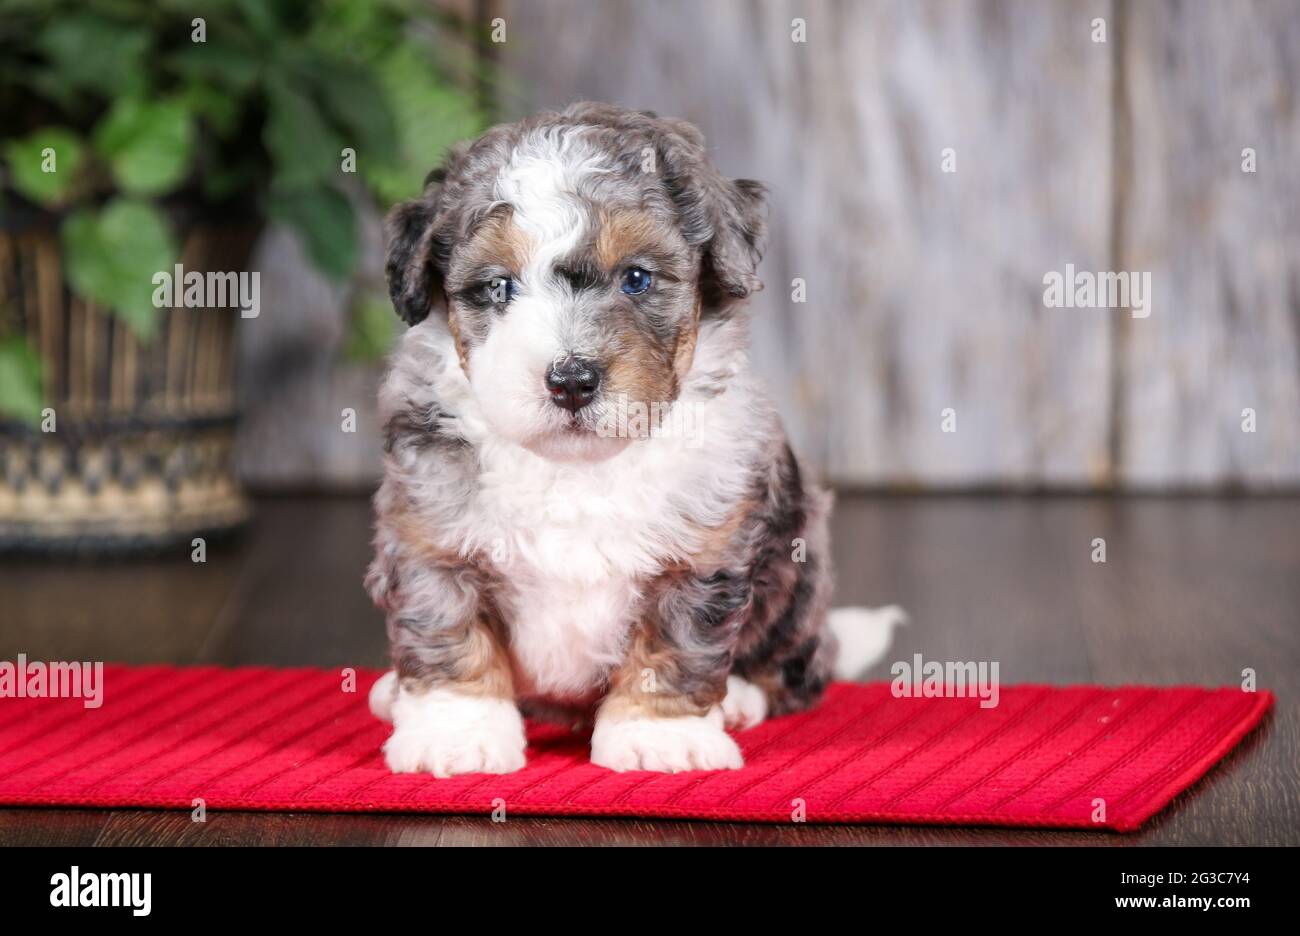 F2 Mini Bernedoodle puppy looking at camera at 5 weeks old. Sitting on red towel mat. Stock Photo